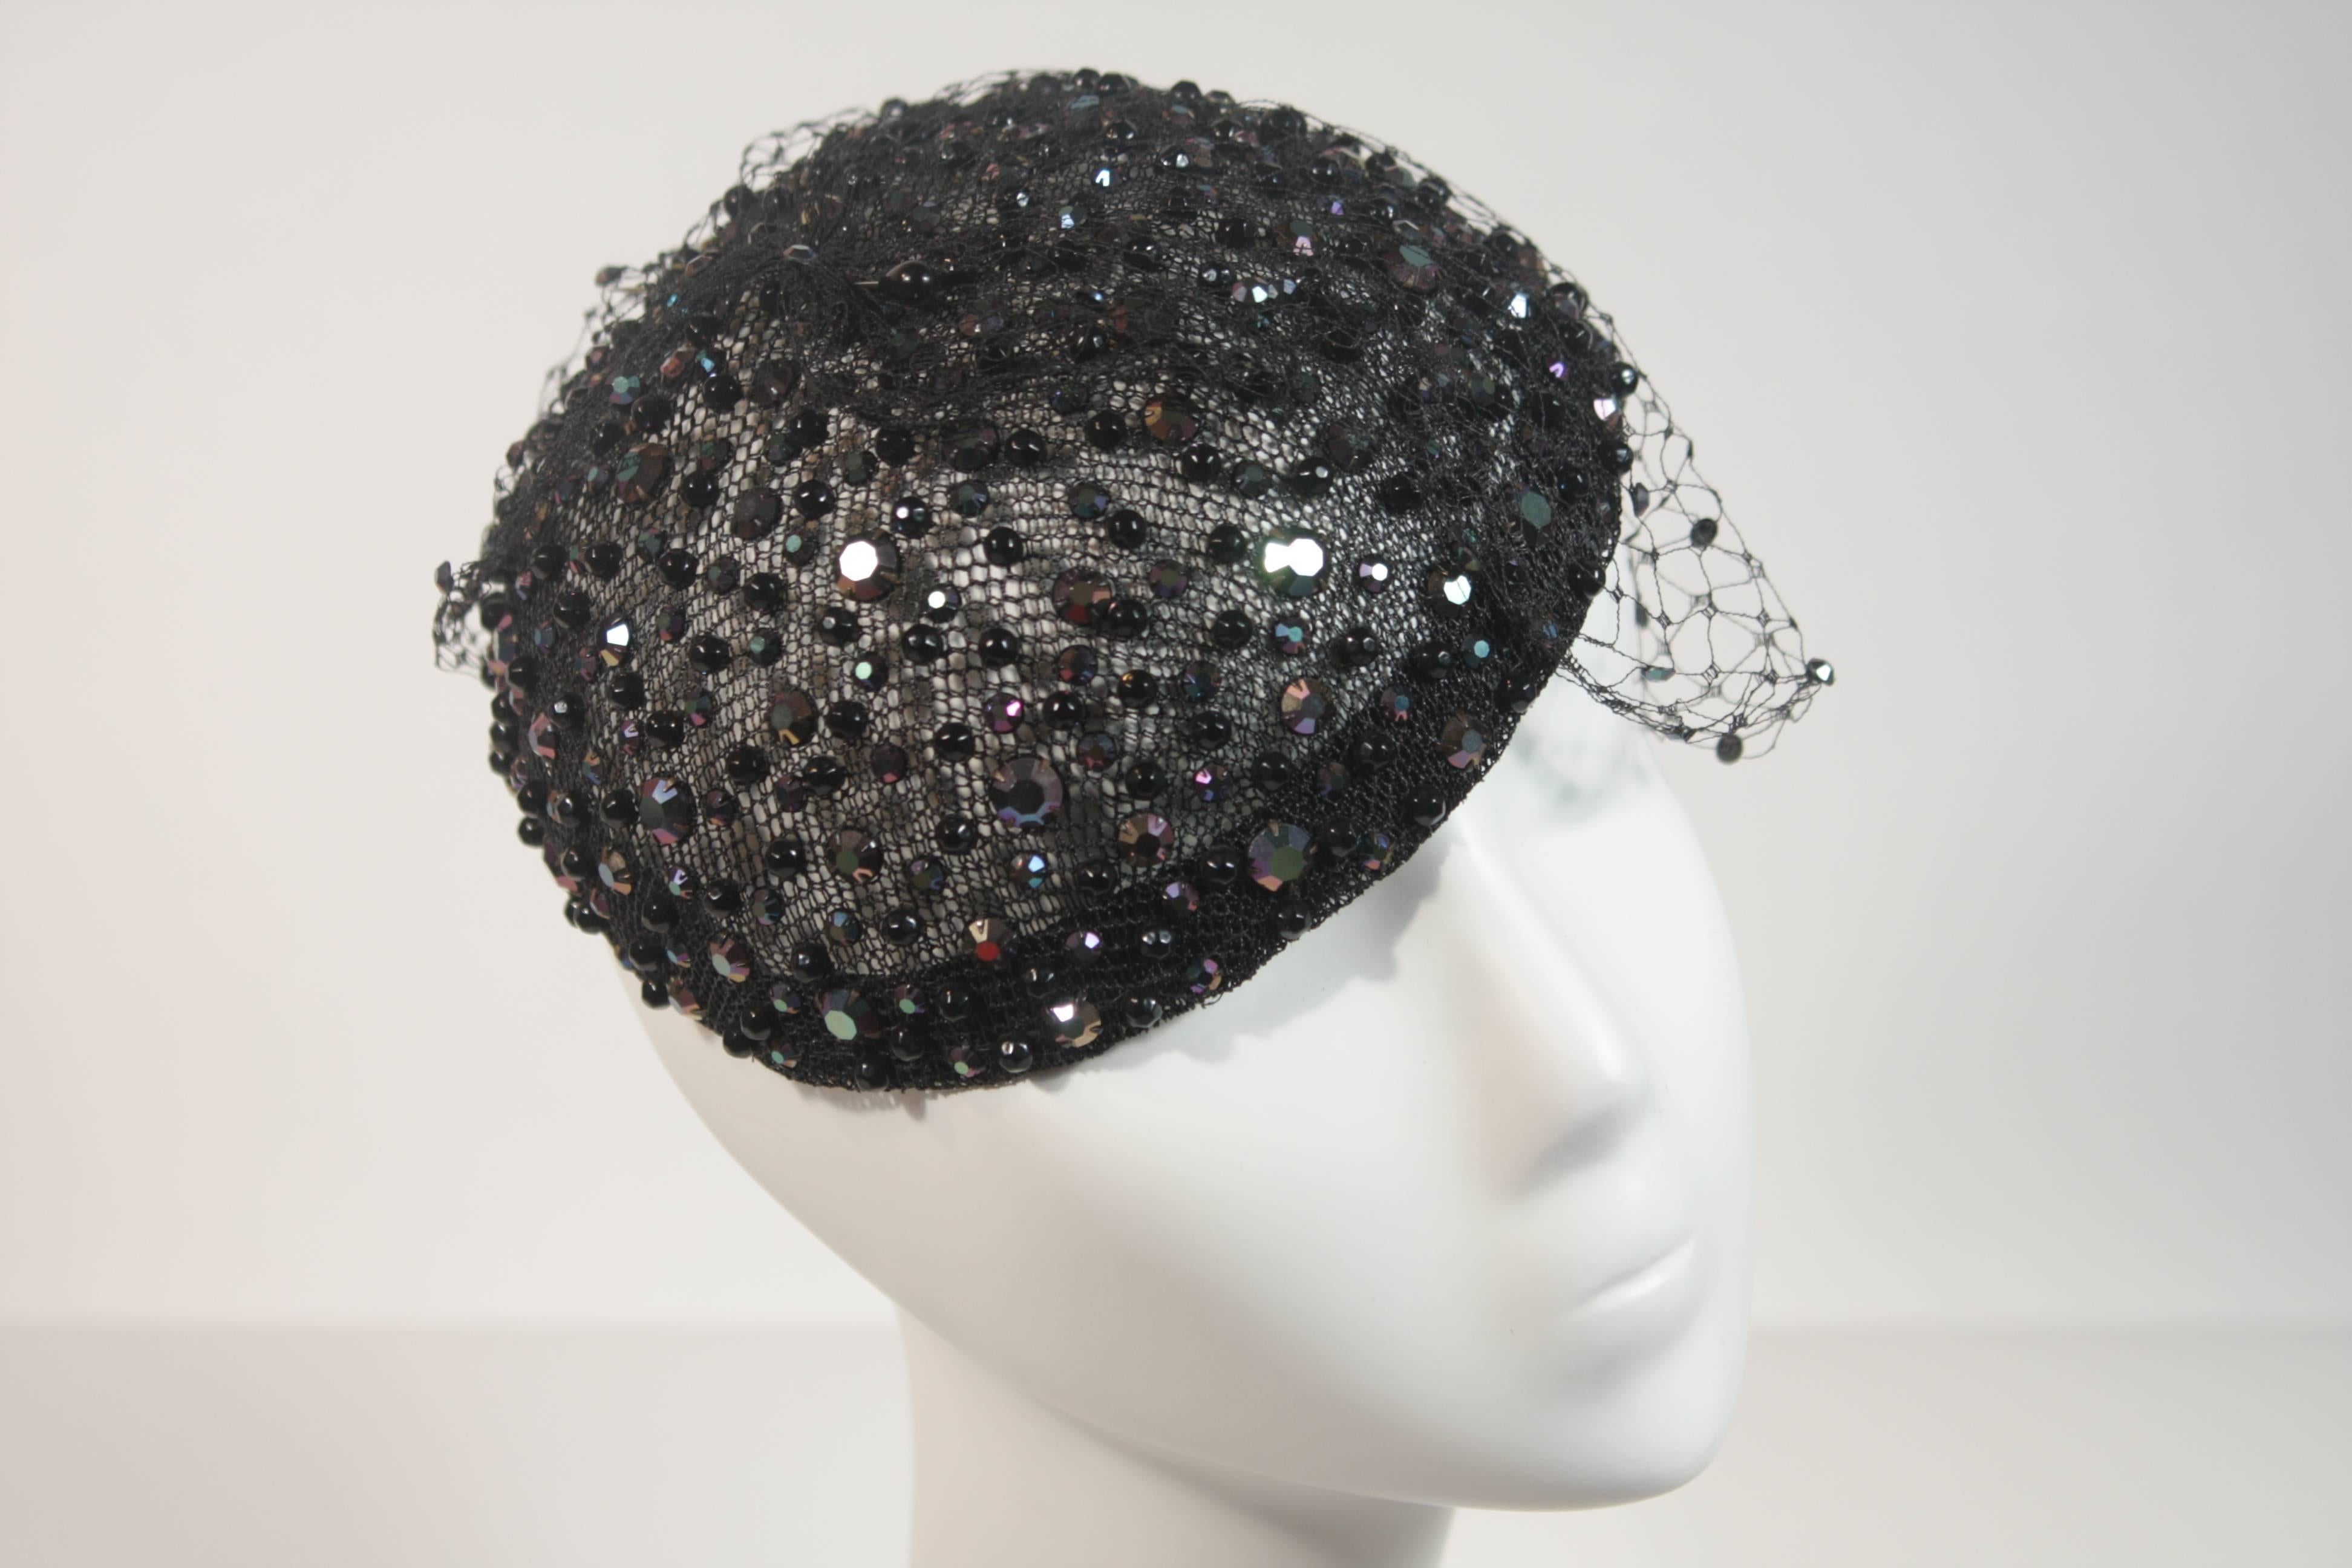 hats with netting